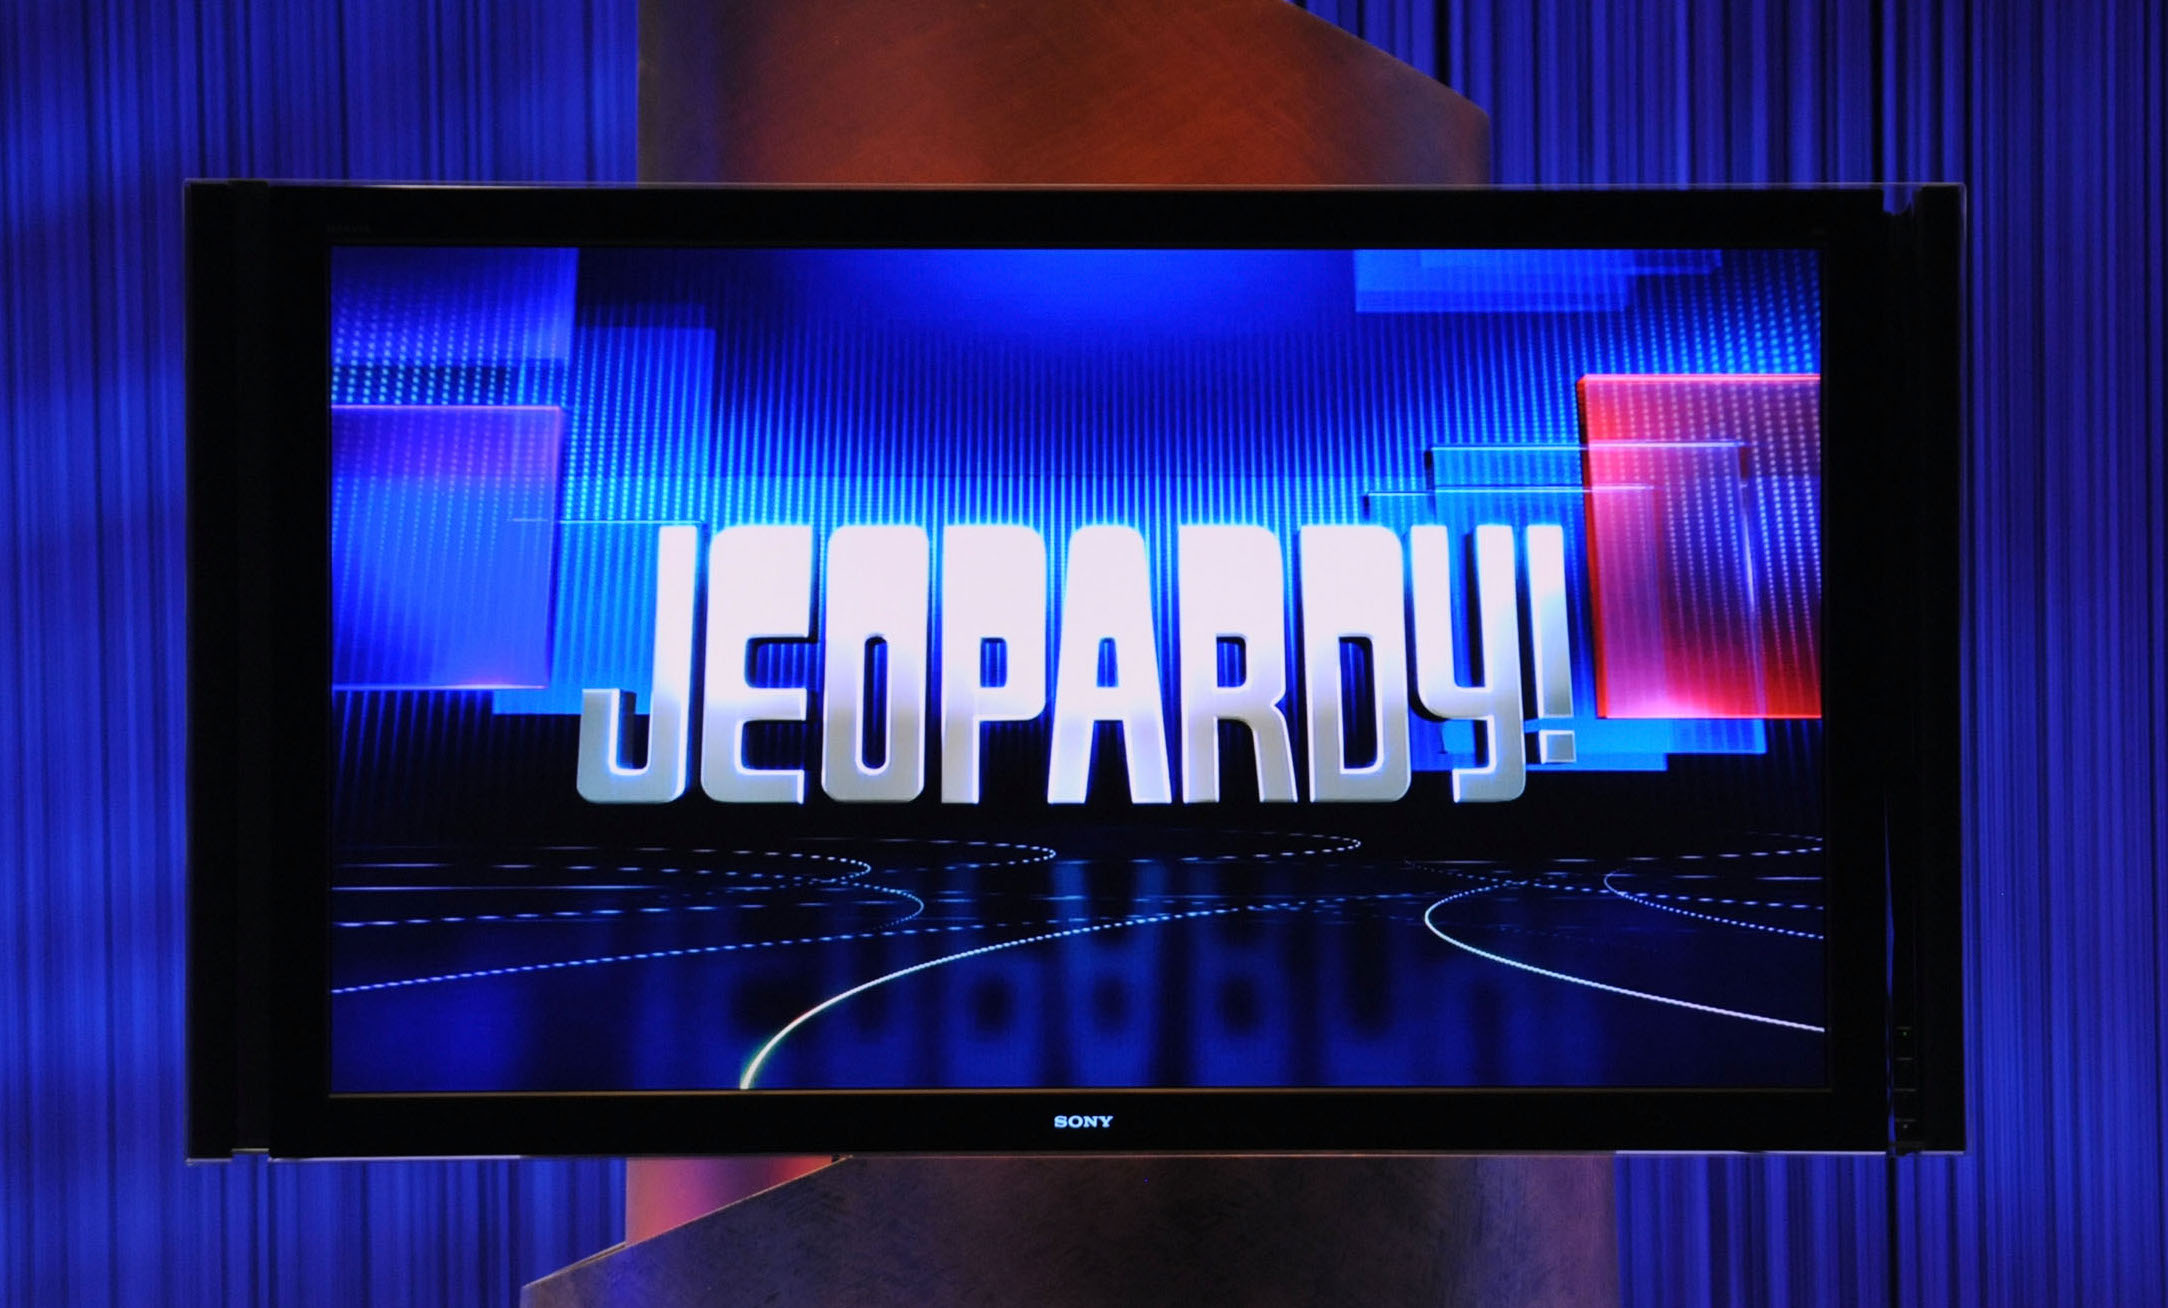 Becky Lynch Sets Jeopardy! Record By Getting Zero Correct Answers